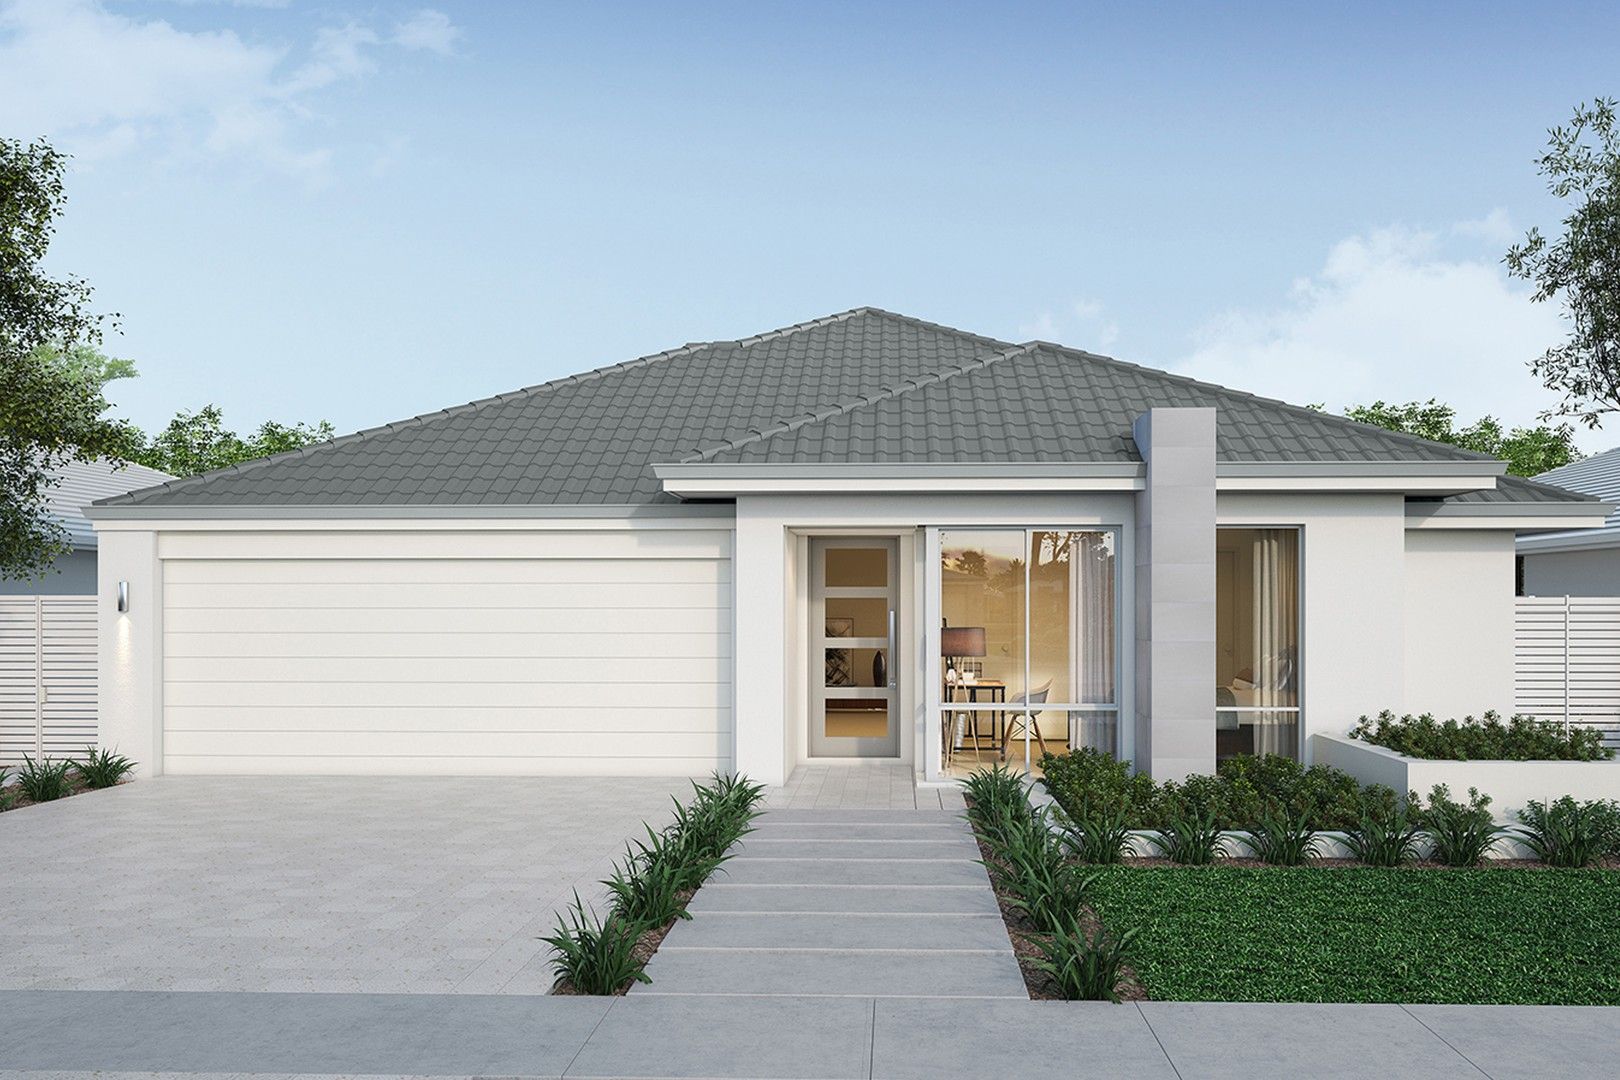 4 bedrooms New House & Land in Lot 110 Vincent Road SINAGRA WA, 6065